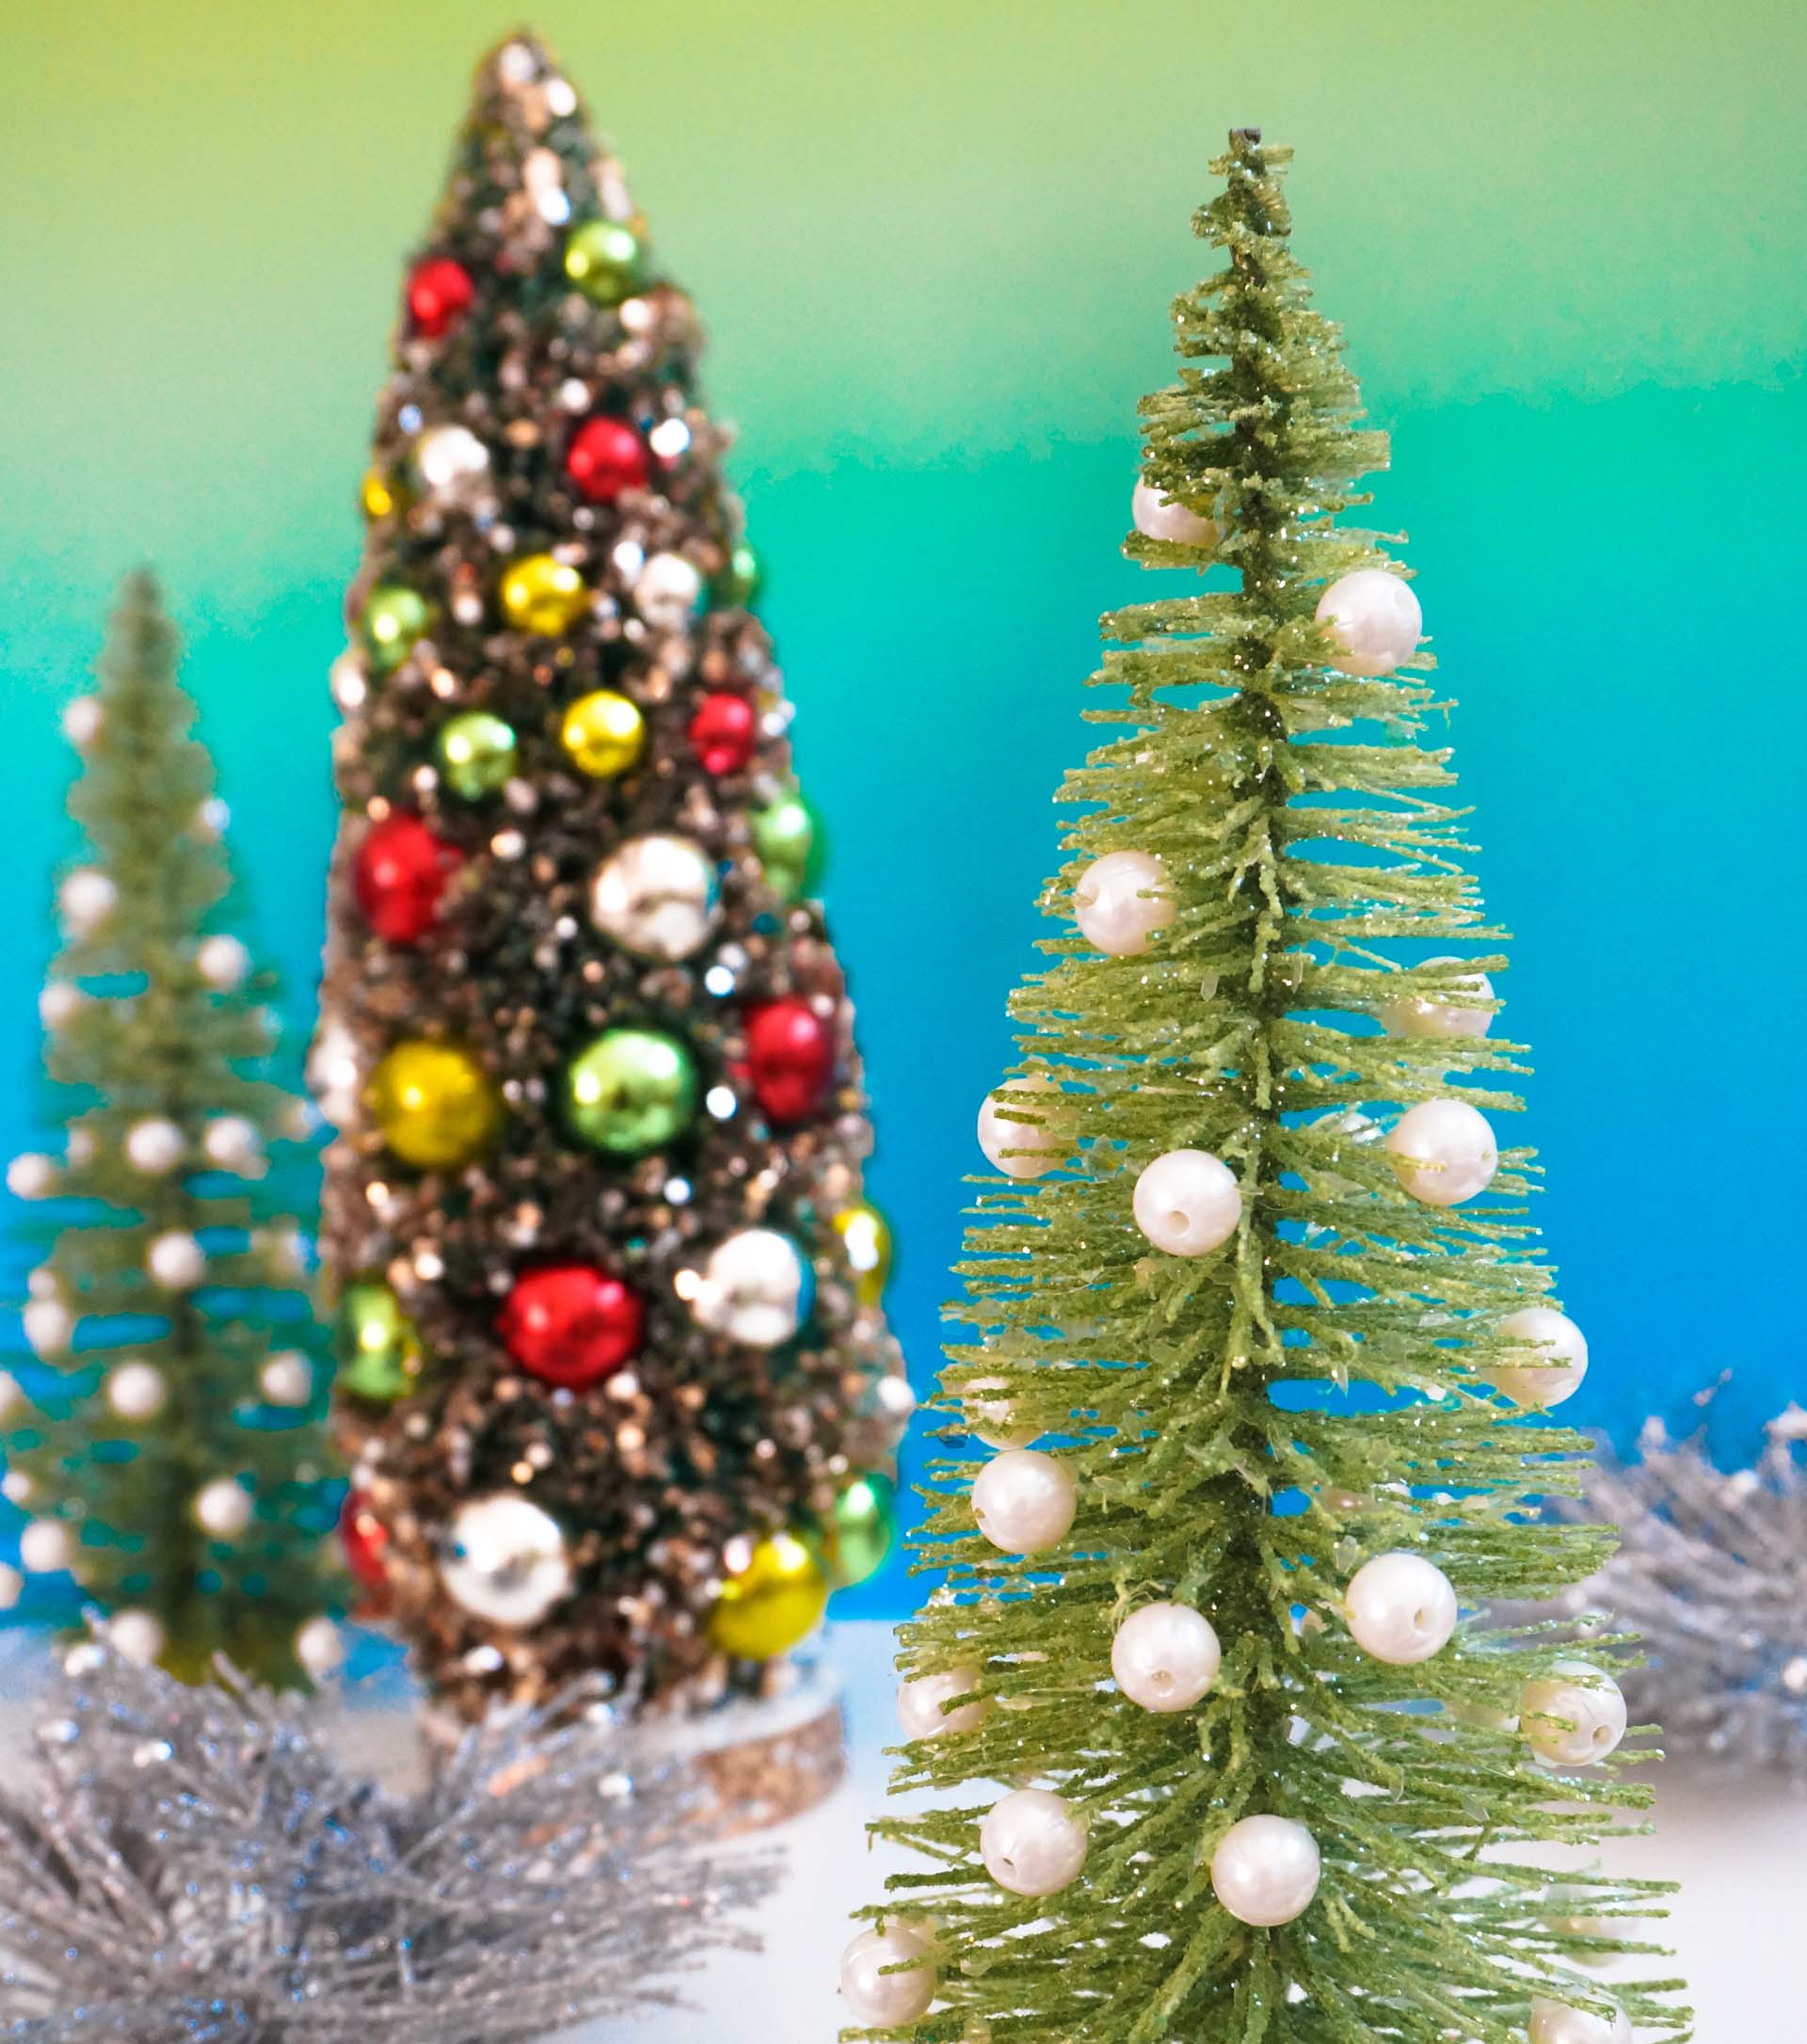 5 Sizes, Sliver NIU MANG 15 Pcs Mini Christmas Tree Bottle Brush Christmas Trees with Glitter Powder Artificial Sisal Tabletop Sisal with Wood Base for Christmas Party Home Decoration